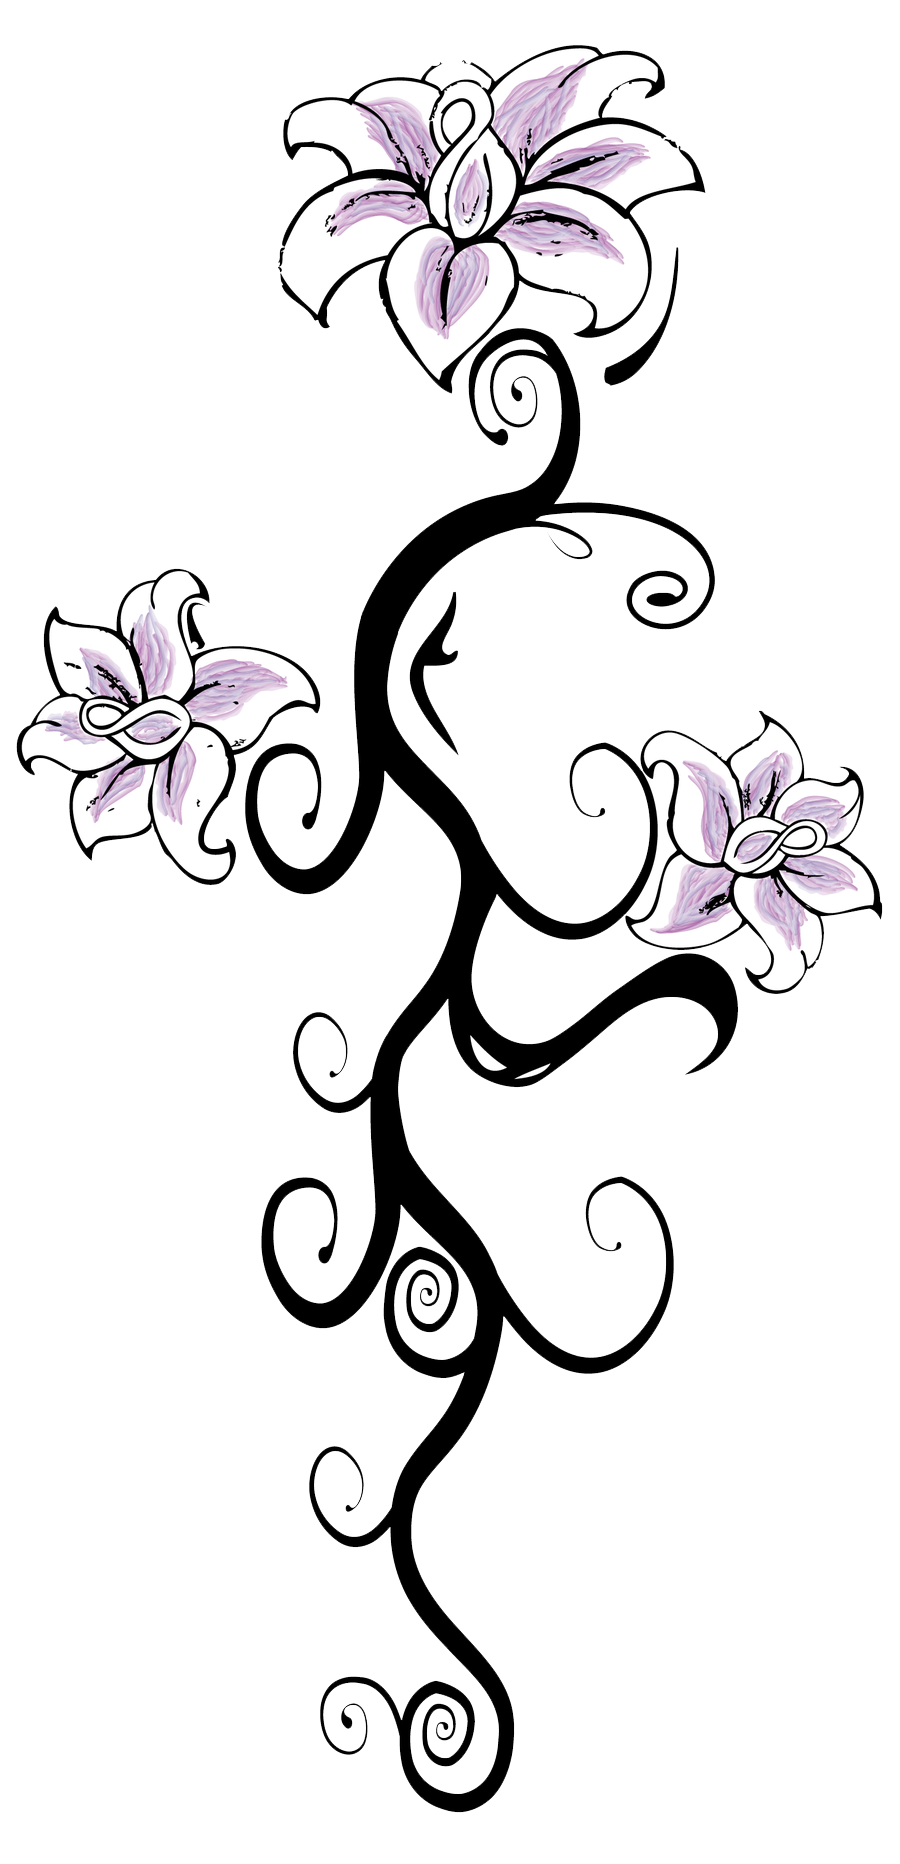 Flower Tattoo PNG Transparent Images | PNG All